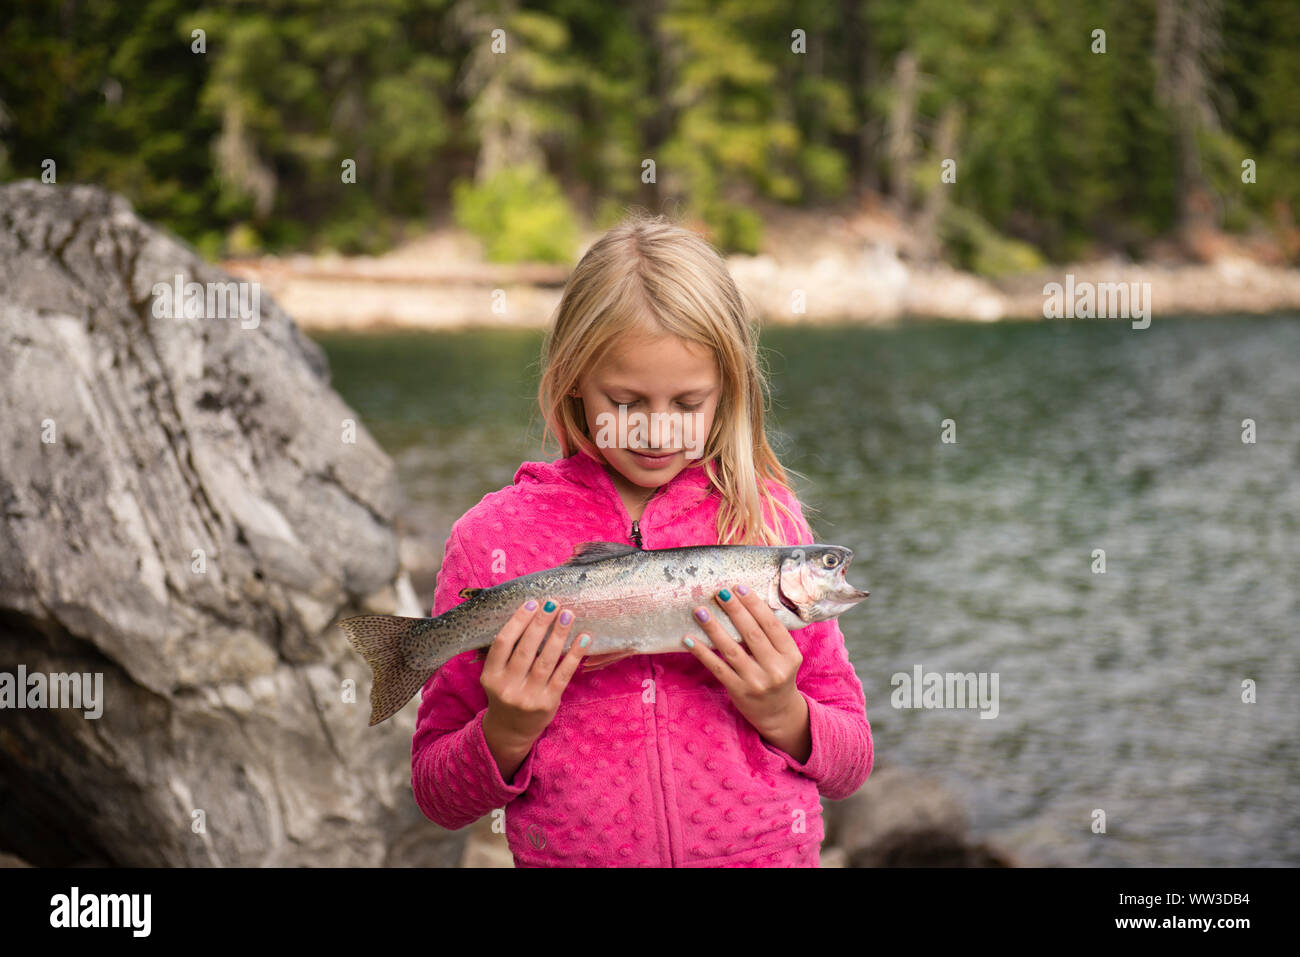 Portrait of 8-9 Year Old Girl Holding a Fish at a Lake Stock Photo